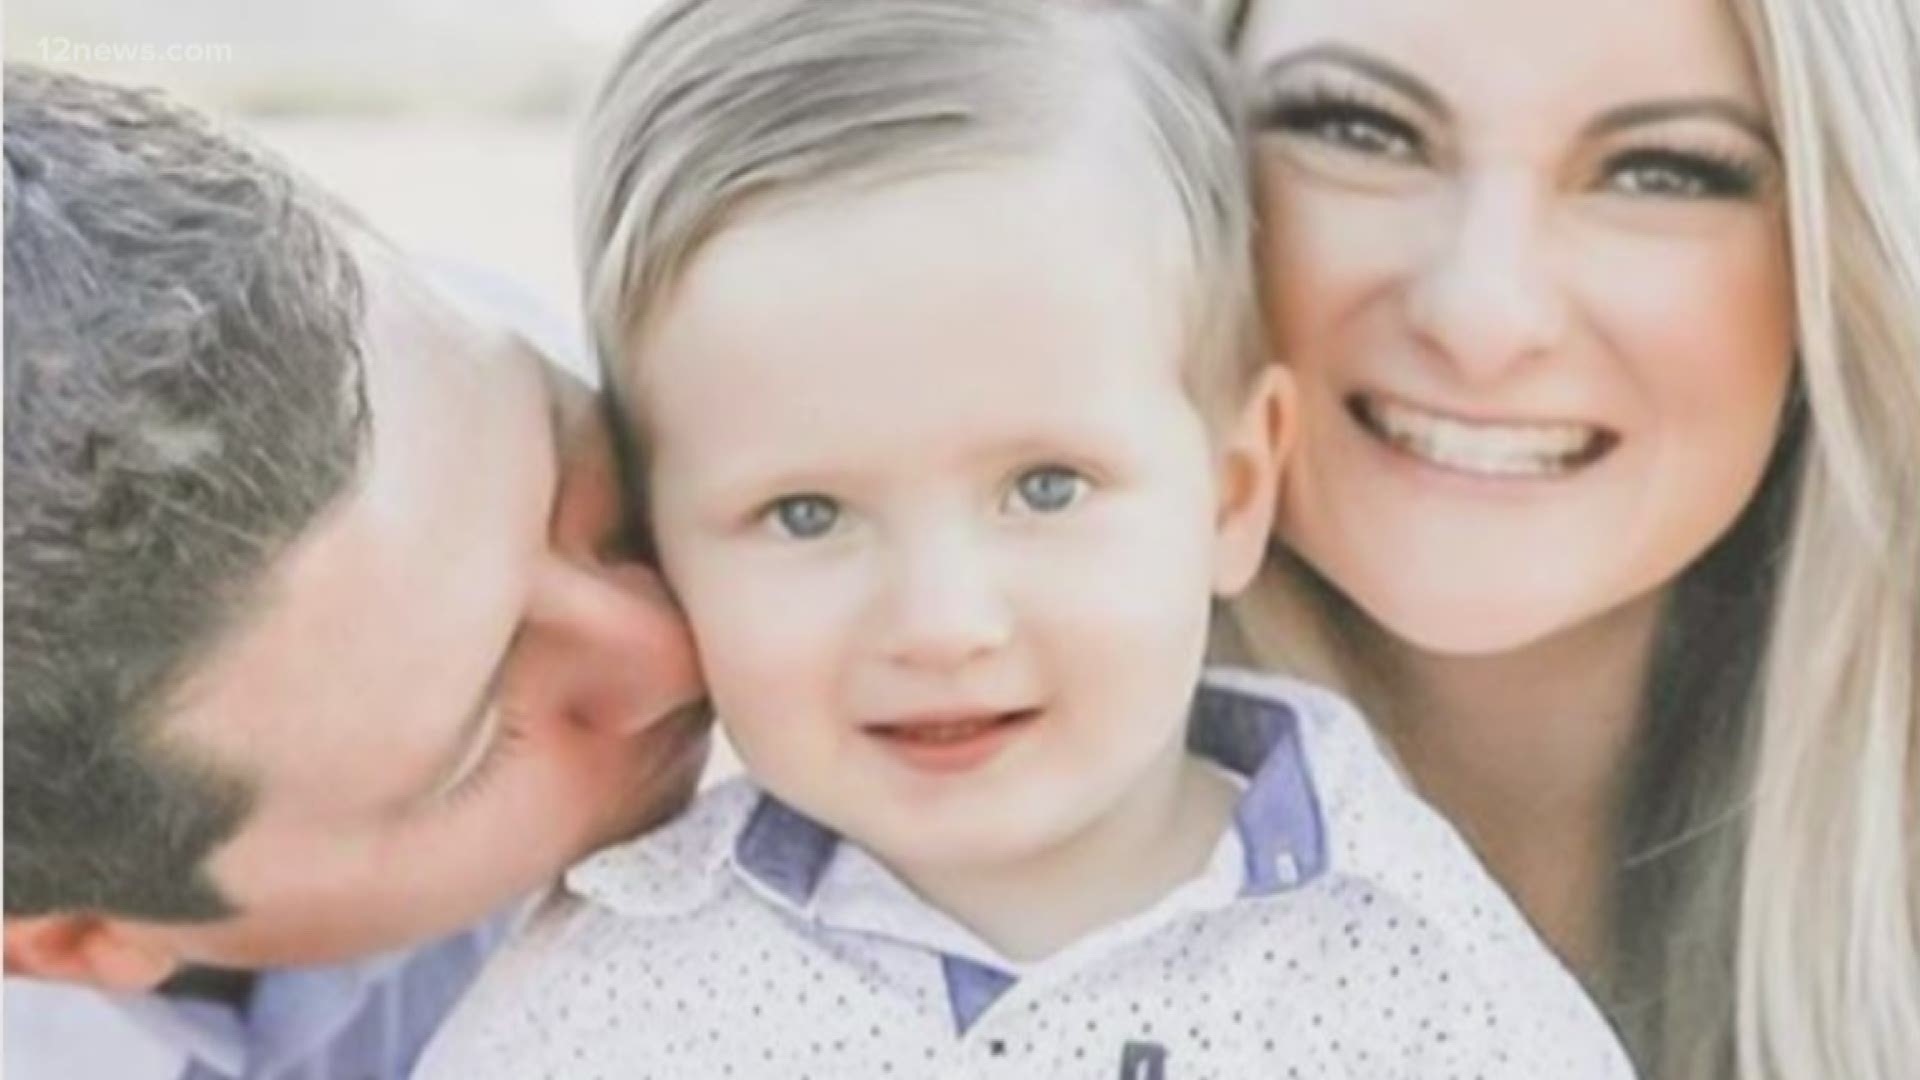 A family from LA was in the Valley for spring training when their 2-year-old son was killed by a driver who jumped the curb in front of a Scottsdale breakfast spot.